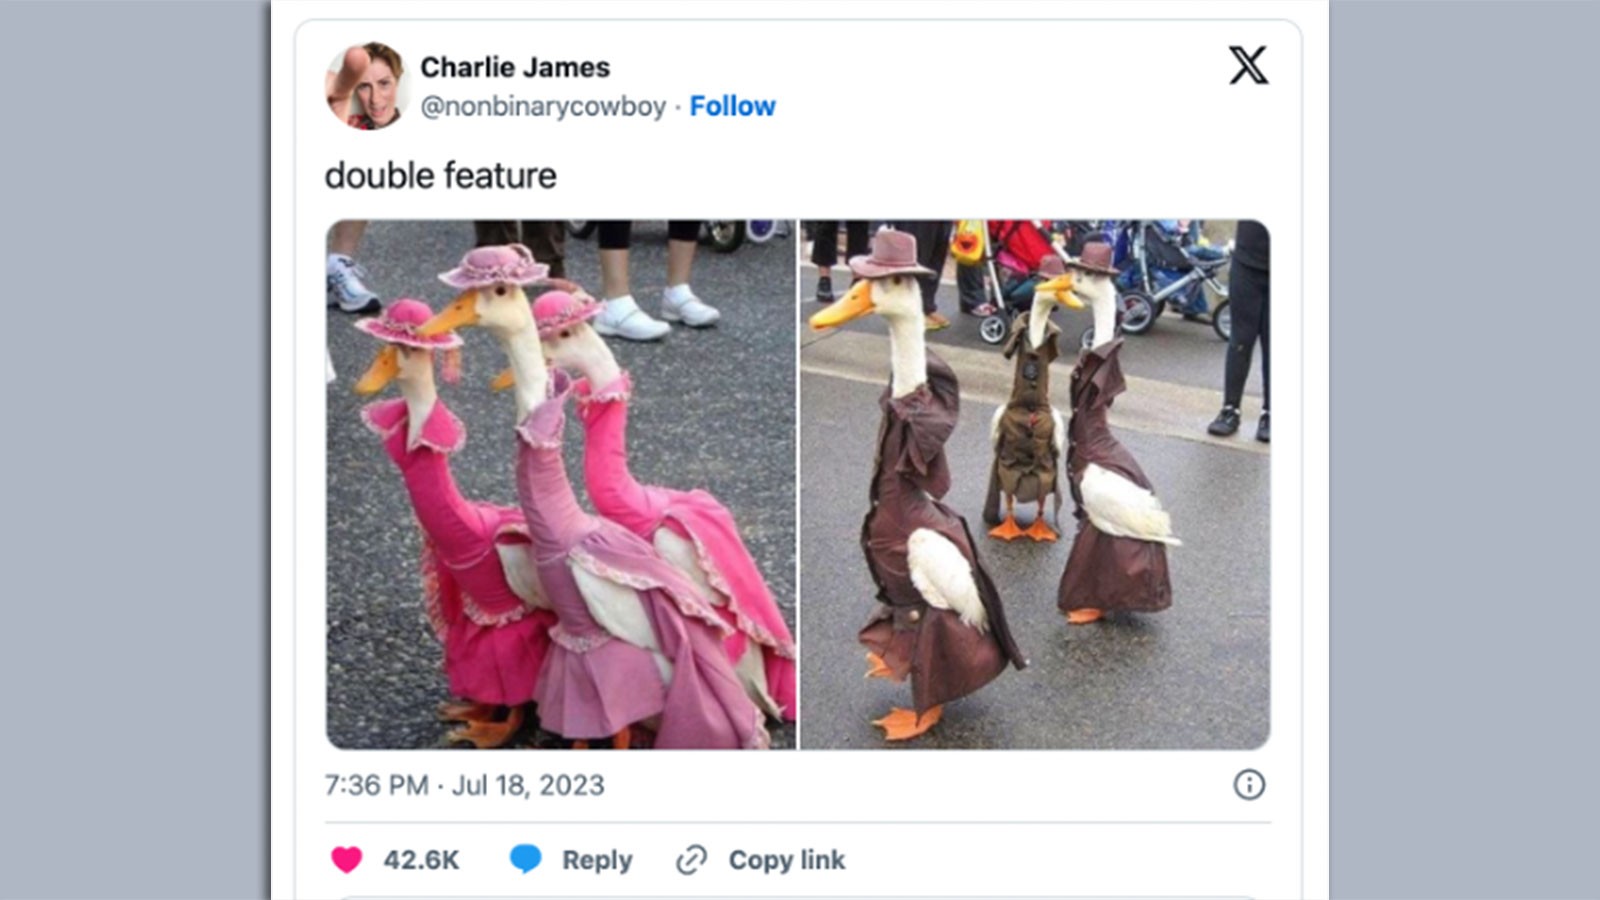 "Double feature" geese dressed in pink and brown for Barbenheimer